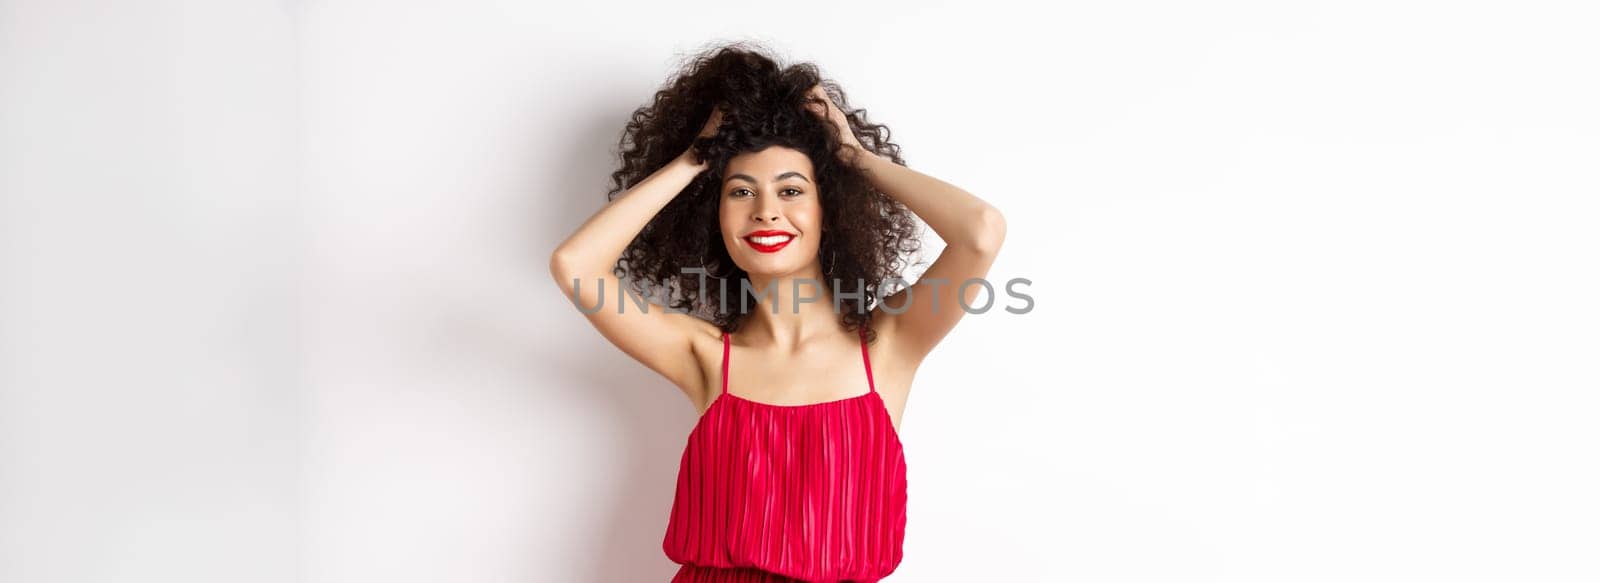 Beauty and fashion. Carefree woman in red dress and makeup, touching curly hair and smiling happy, standing on white background by Benzoix